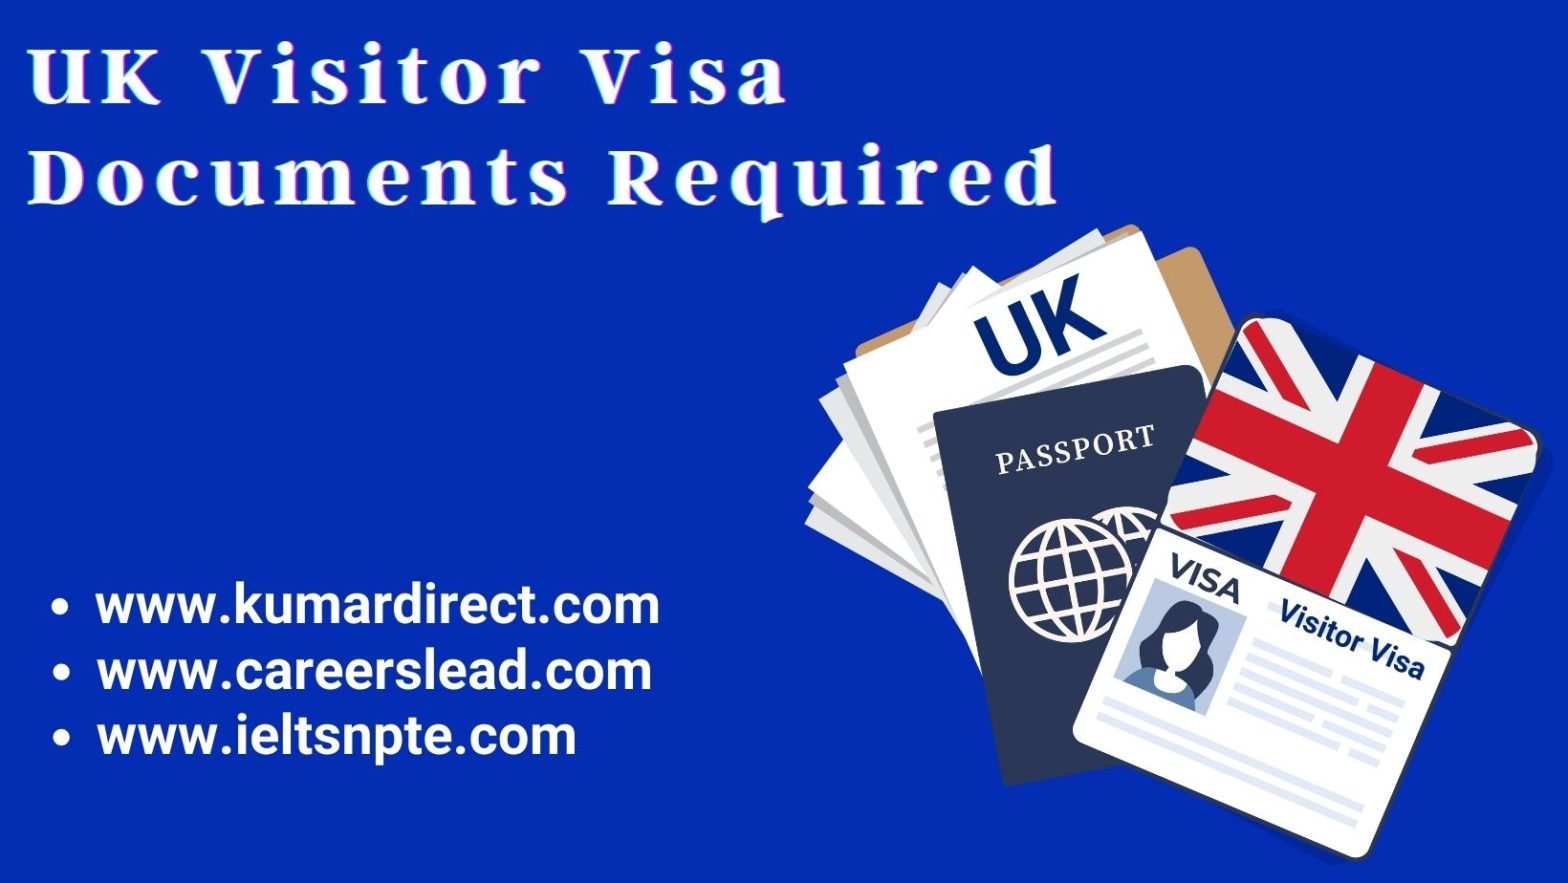 UK Visitor Visa Documents Required